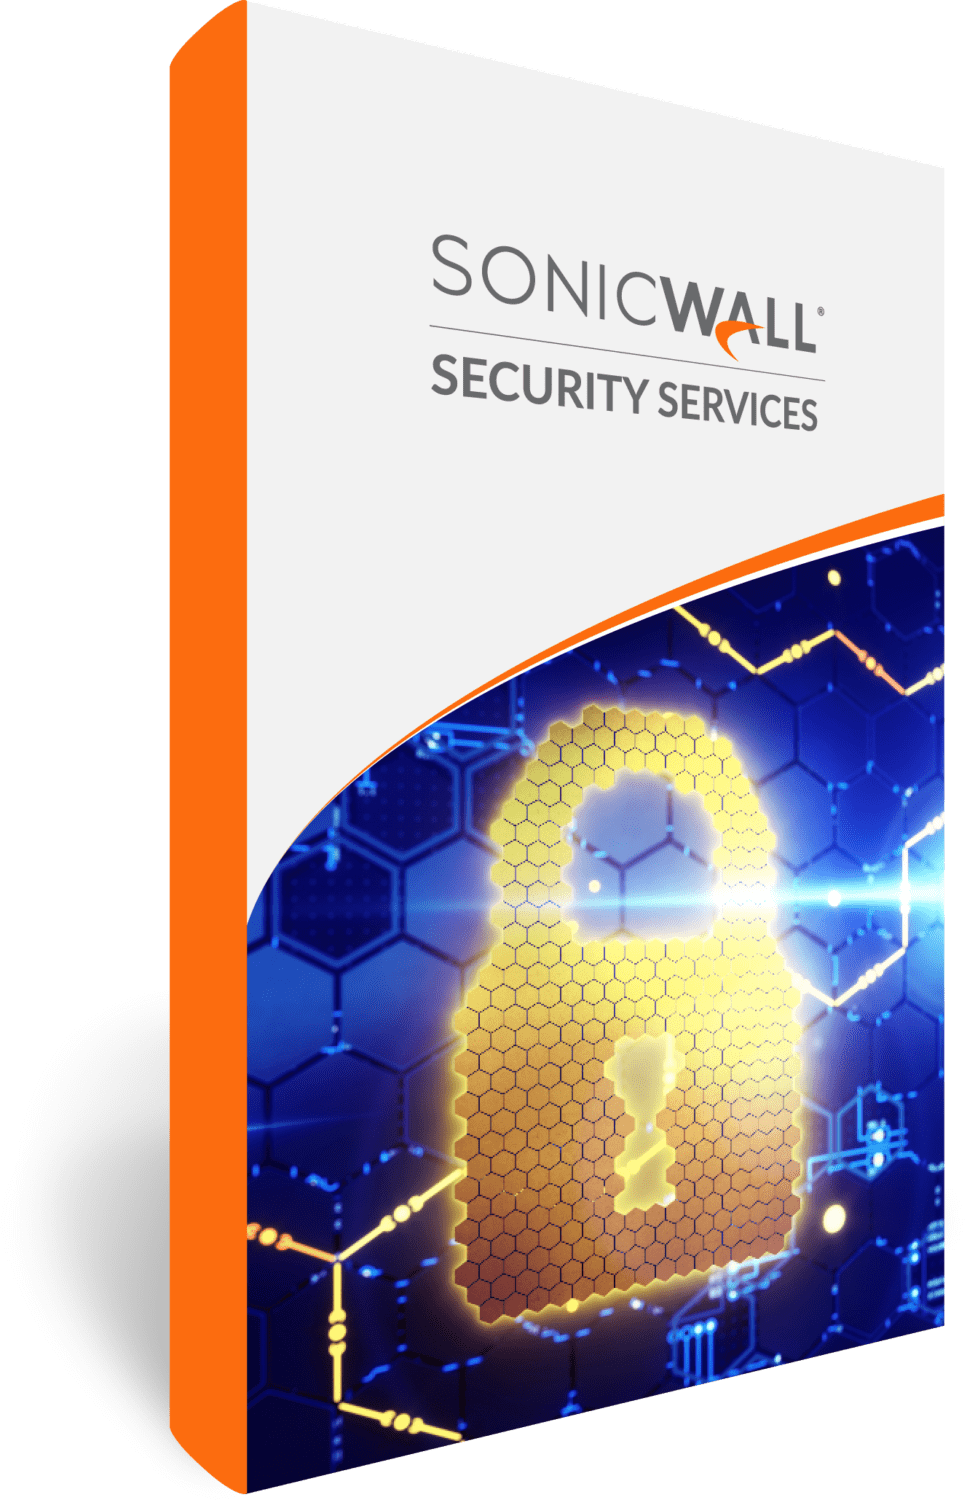 Sonicwall security services